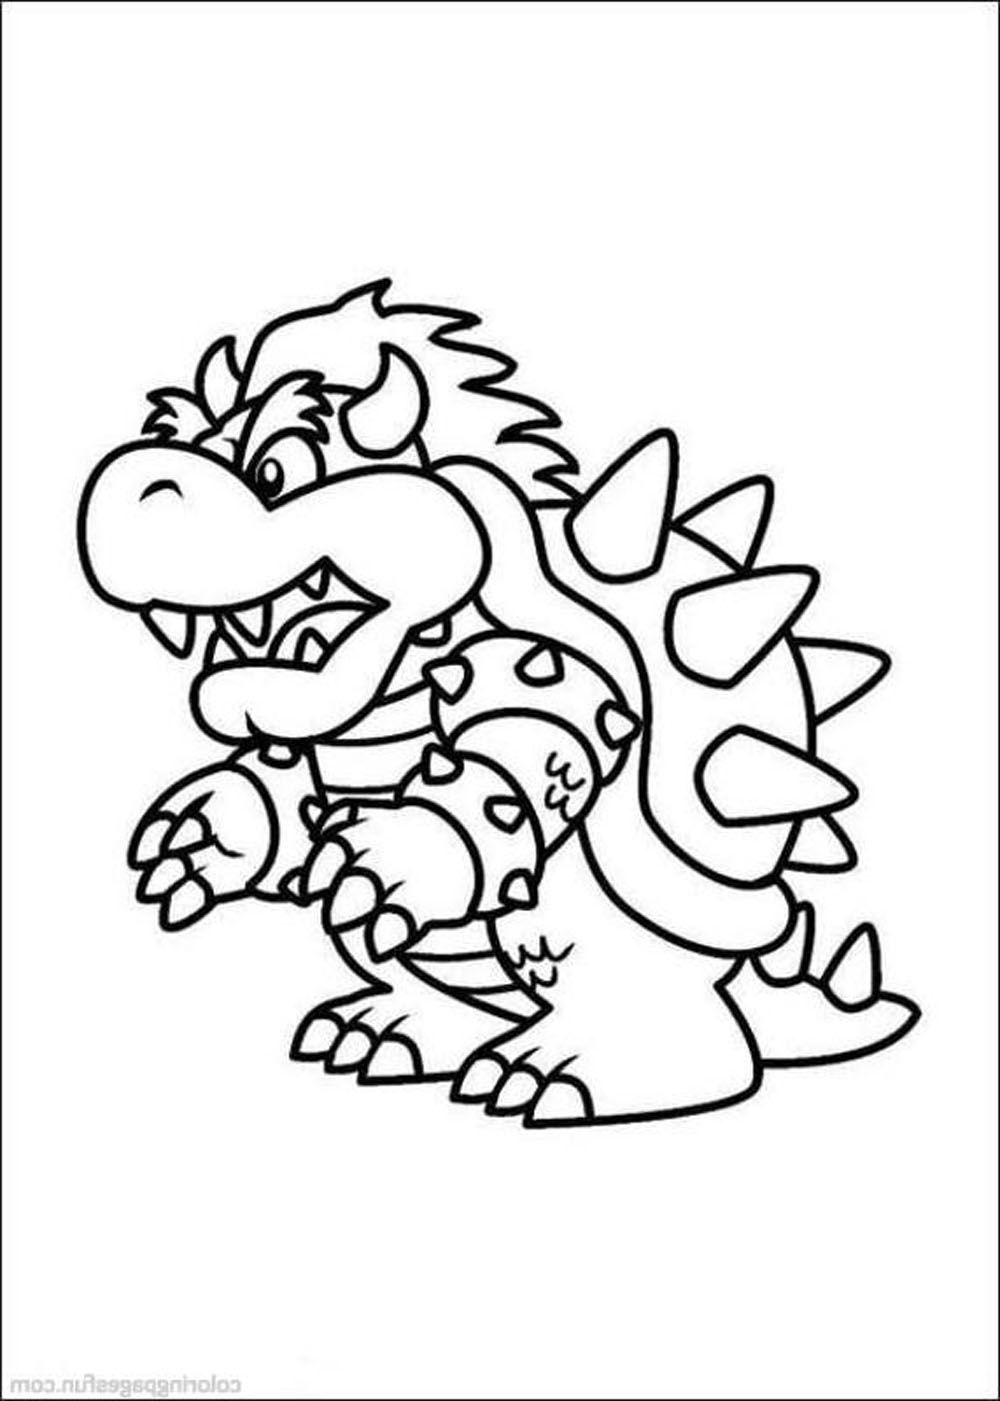 Super Mario Coloring Pages: 123 Adventures to Bring to Life with Color 116